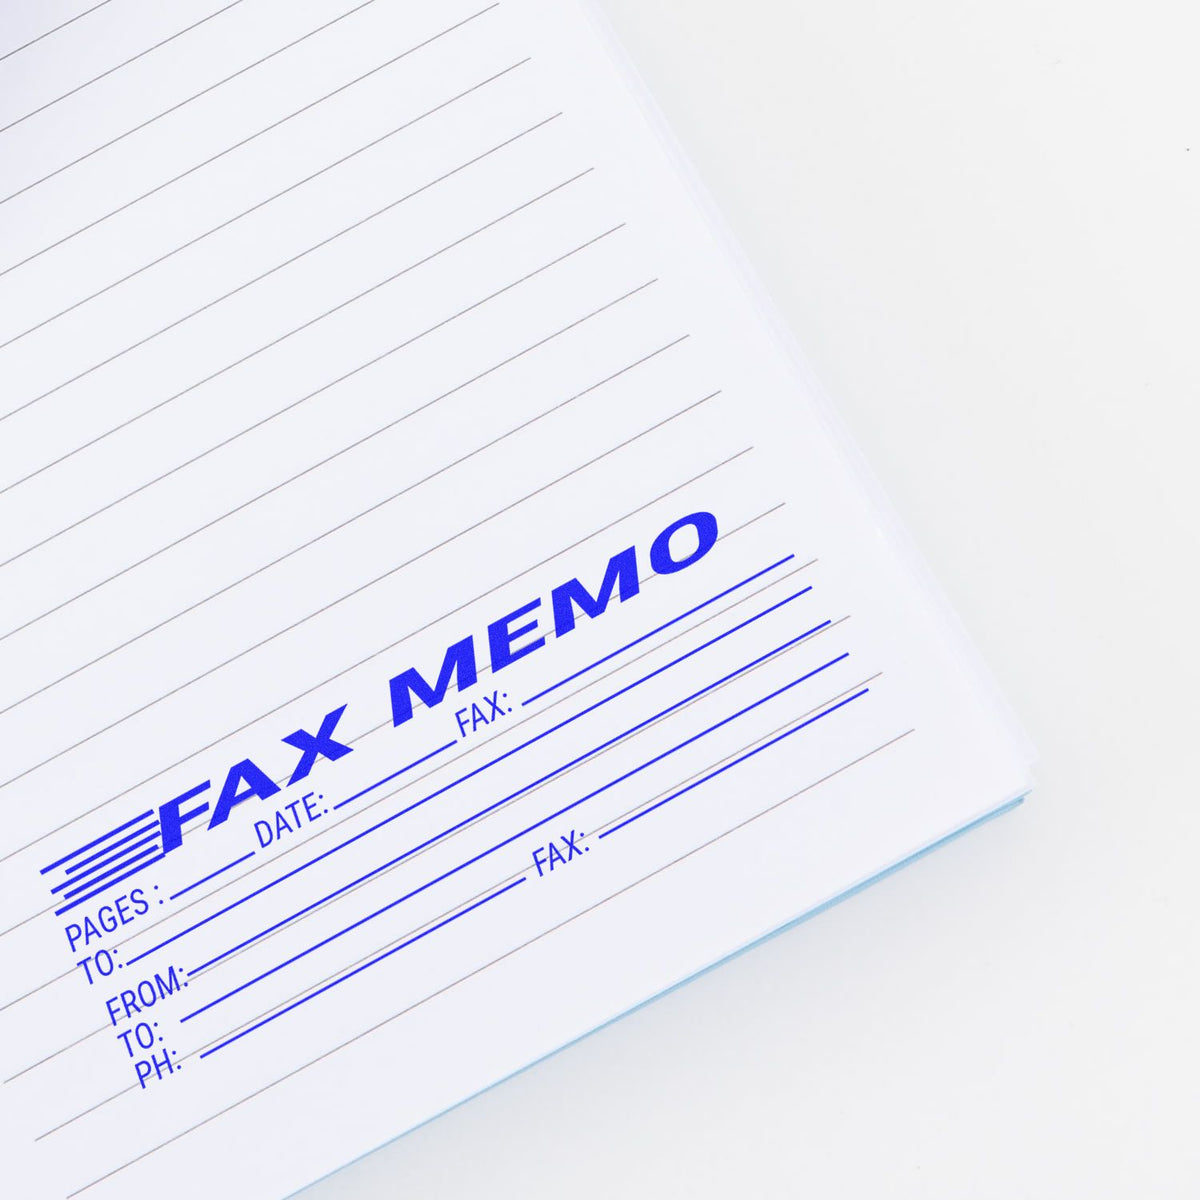 Fax Memo Rubber Stamp In Use Photo